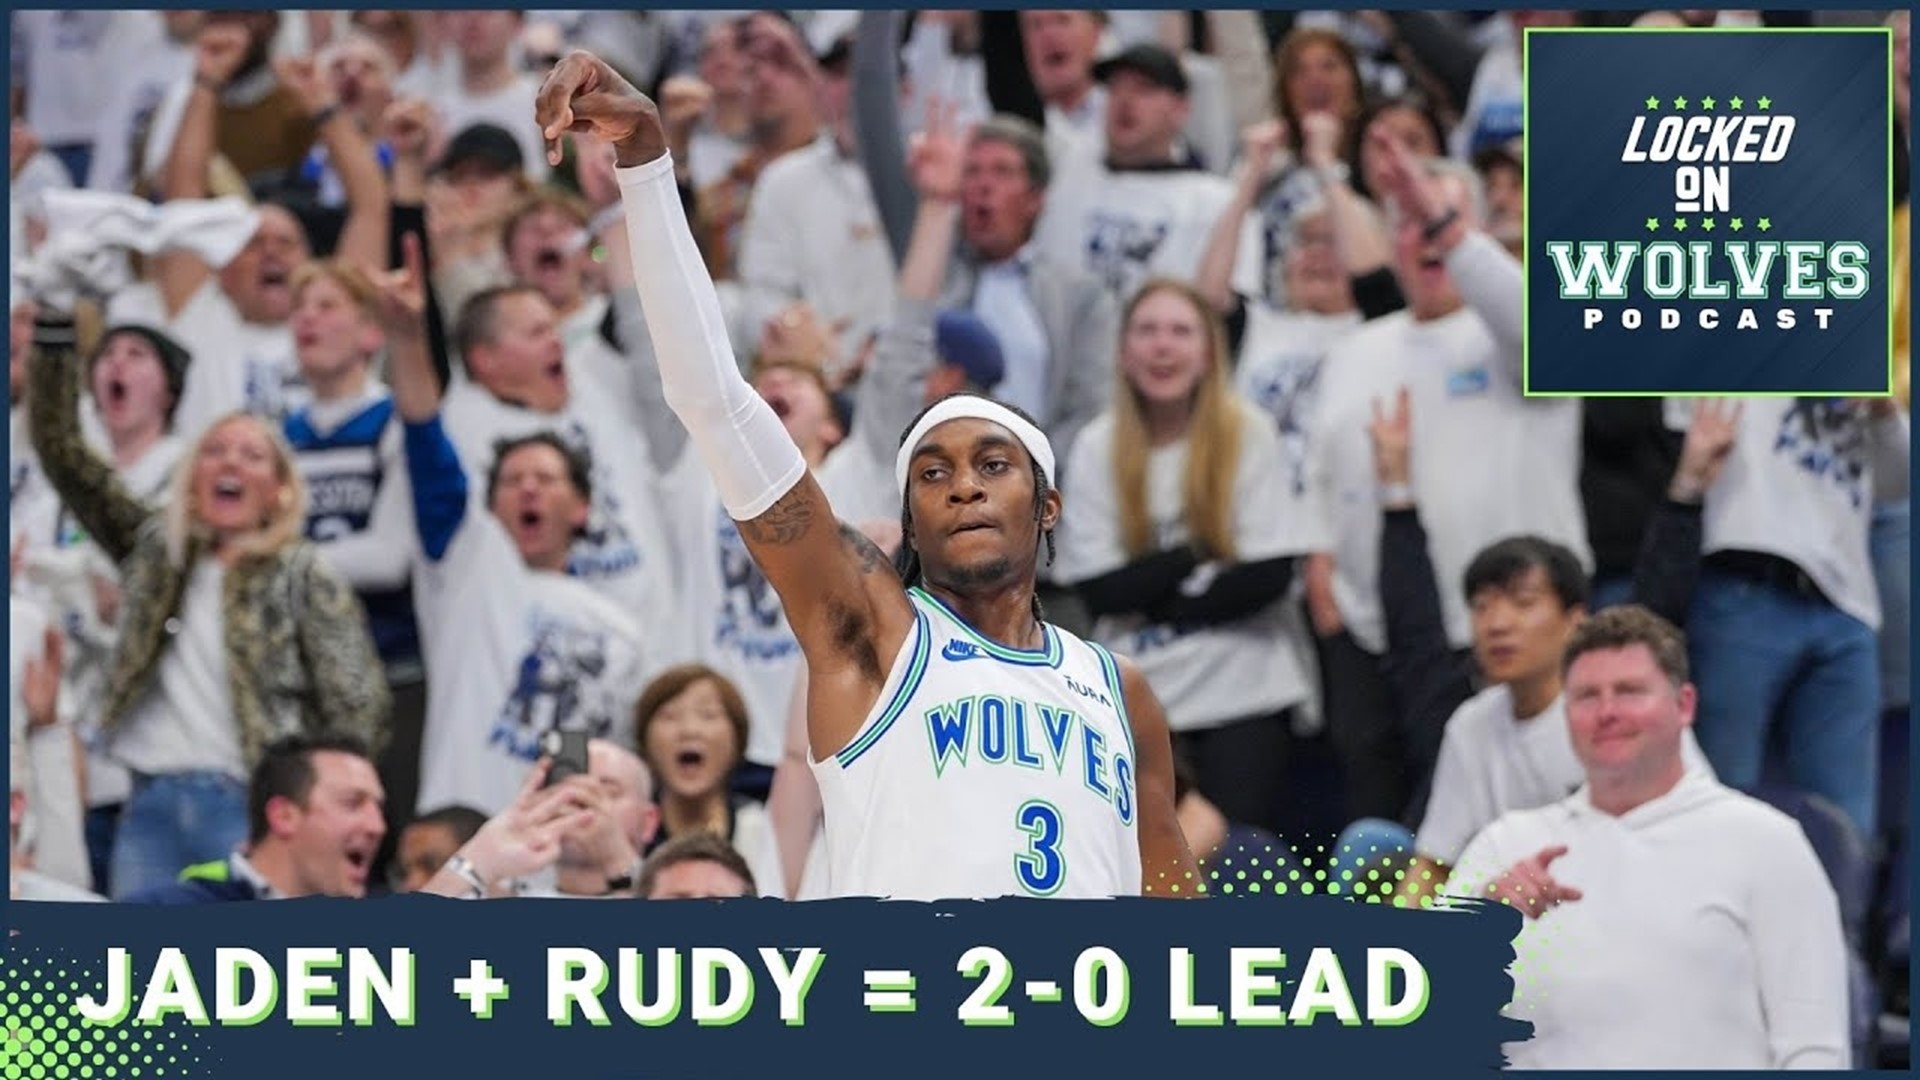 The Minnesota Timberwolves took a 2-0 series lead over the Phoenix Suns behind Rudy Gobert and Jaden McDaniels, who each played starring roles on both ends.